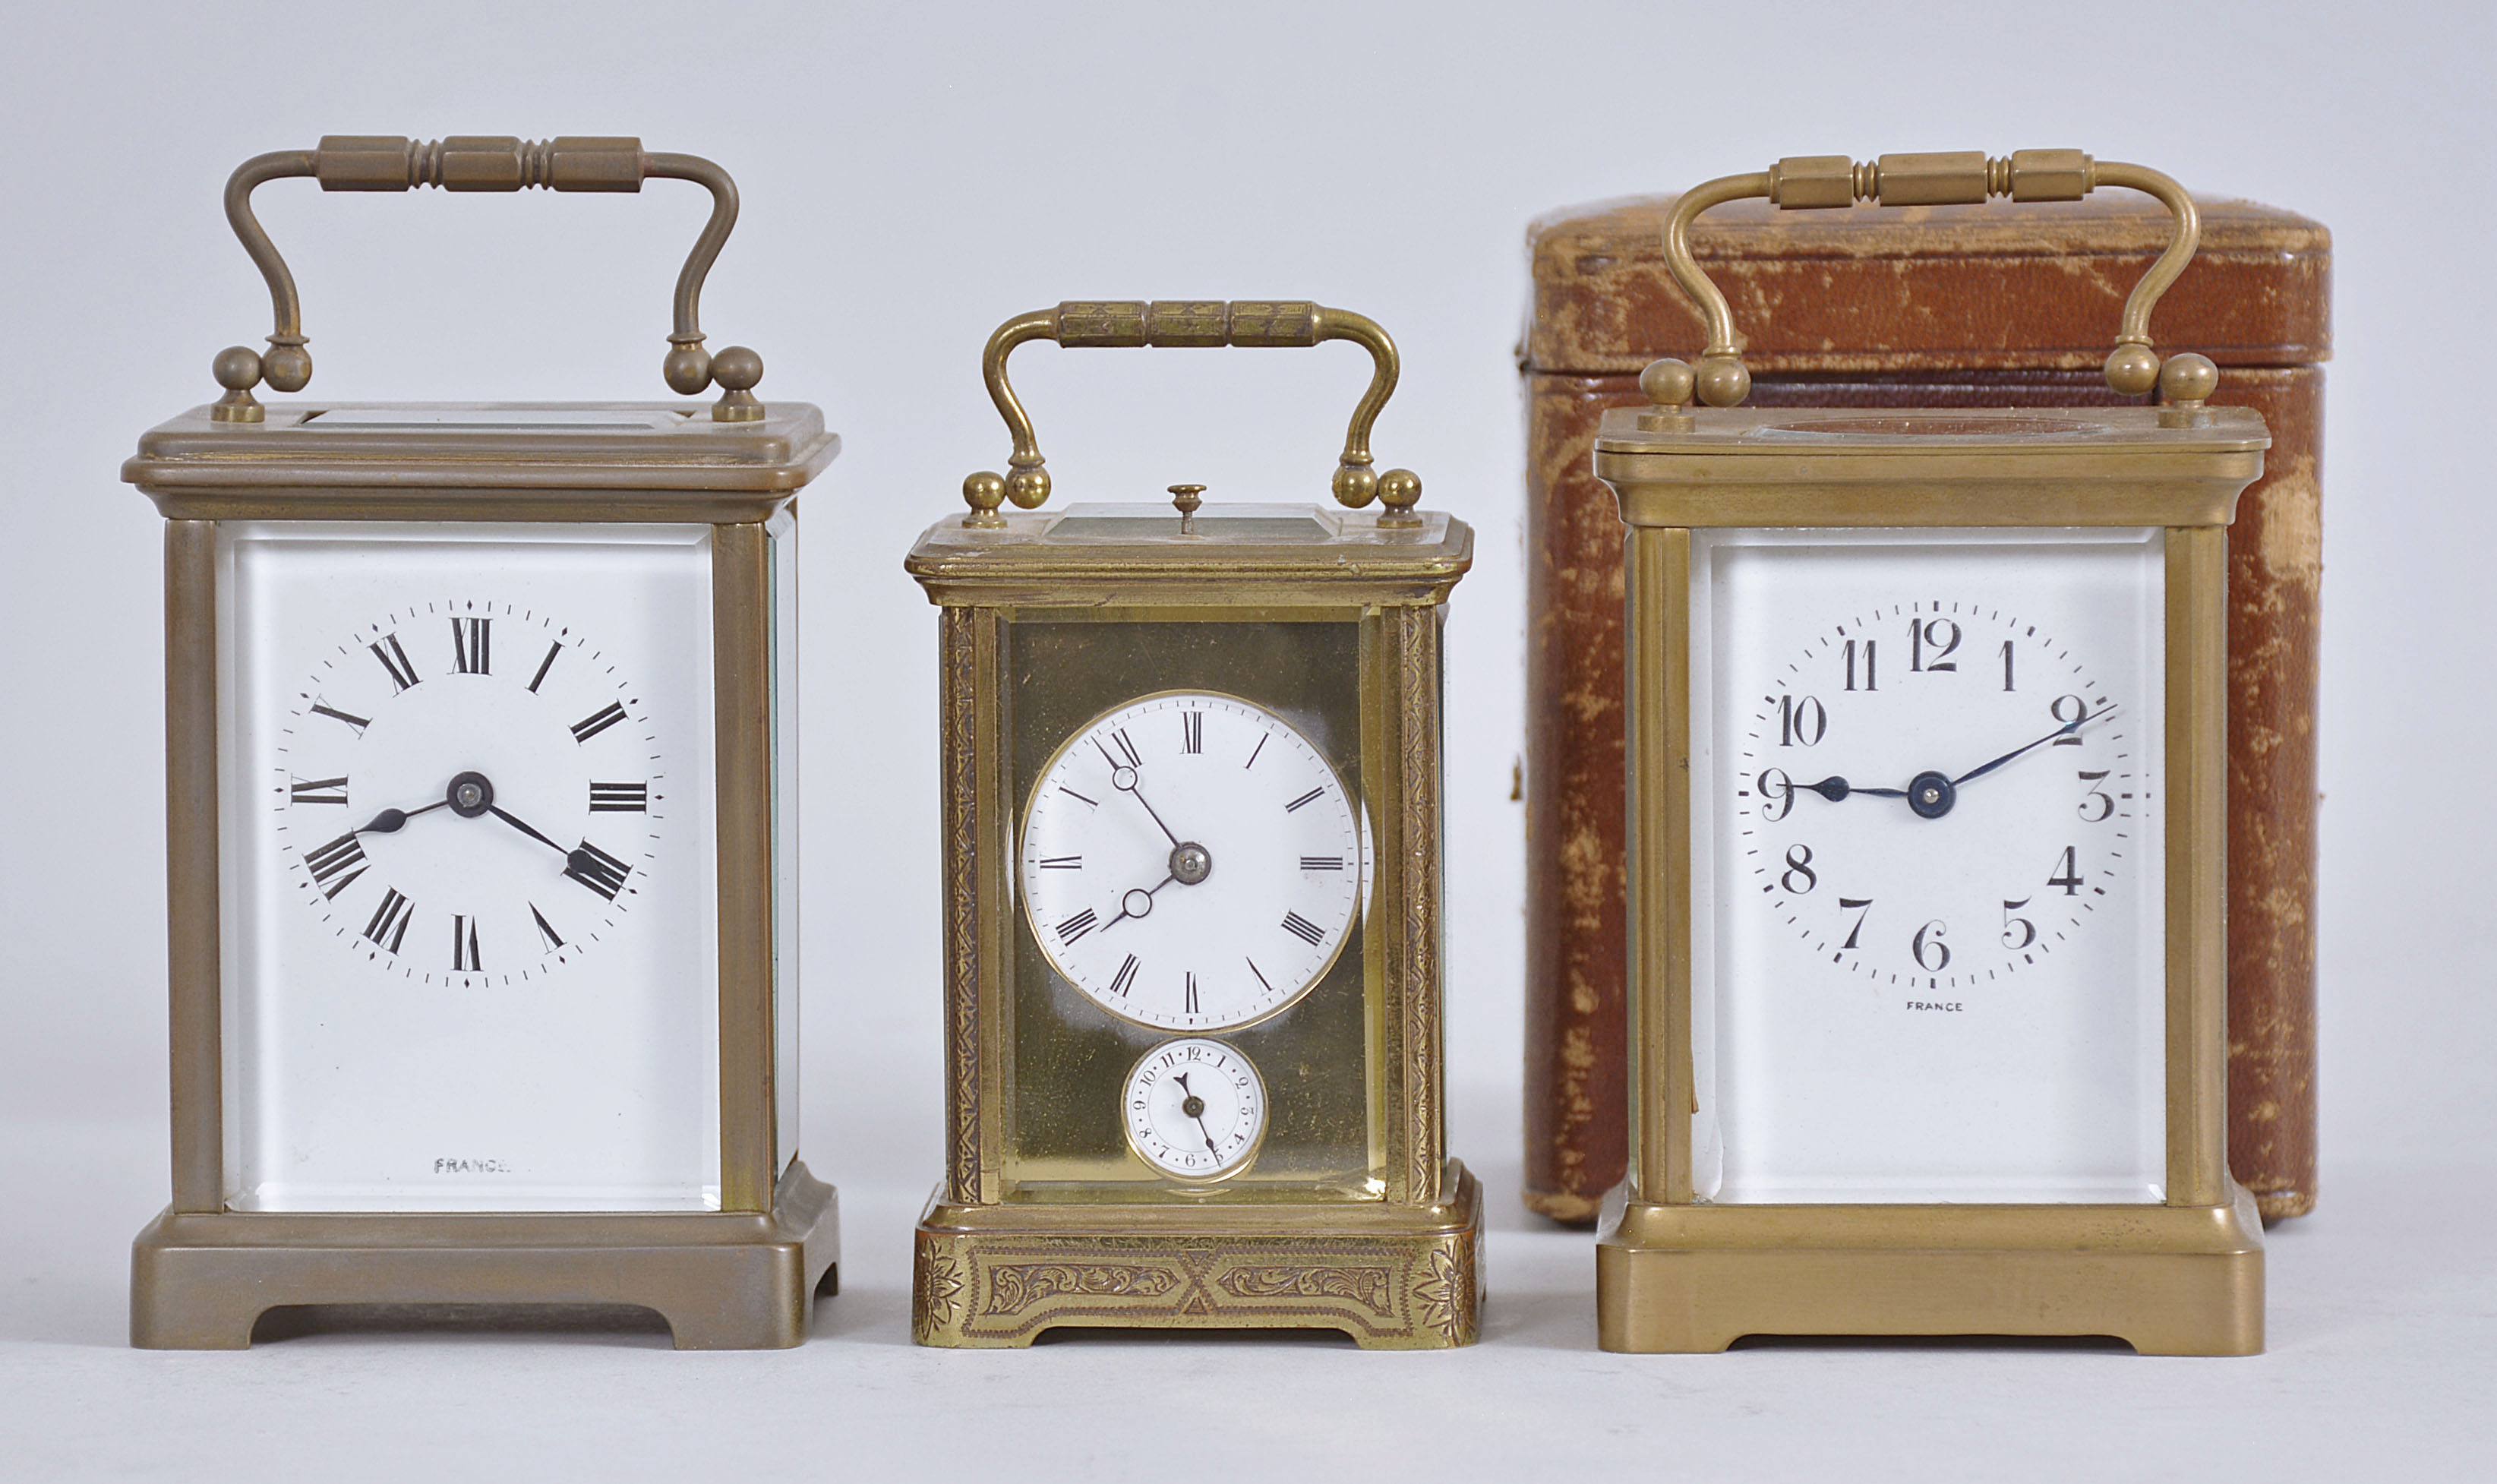 Three French carriage clocks, one with alarm and repeat